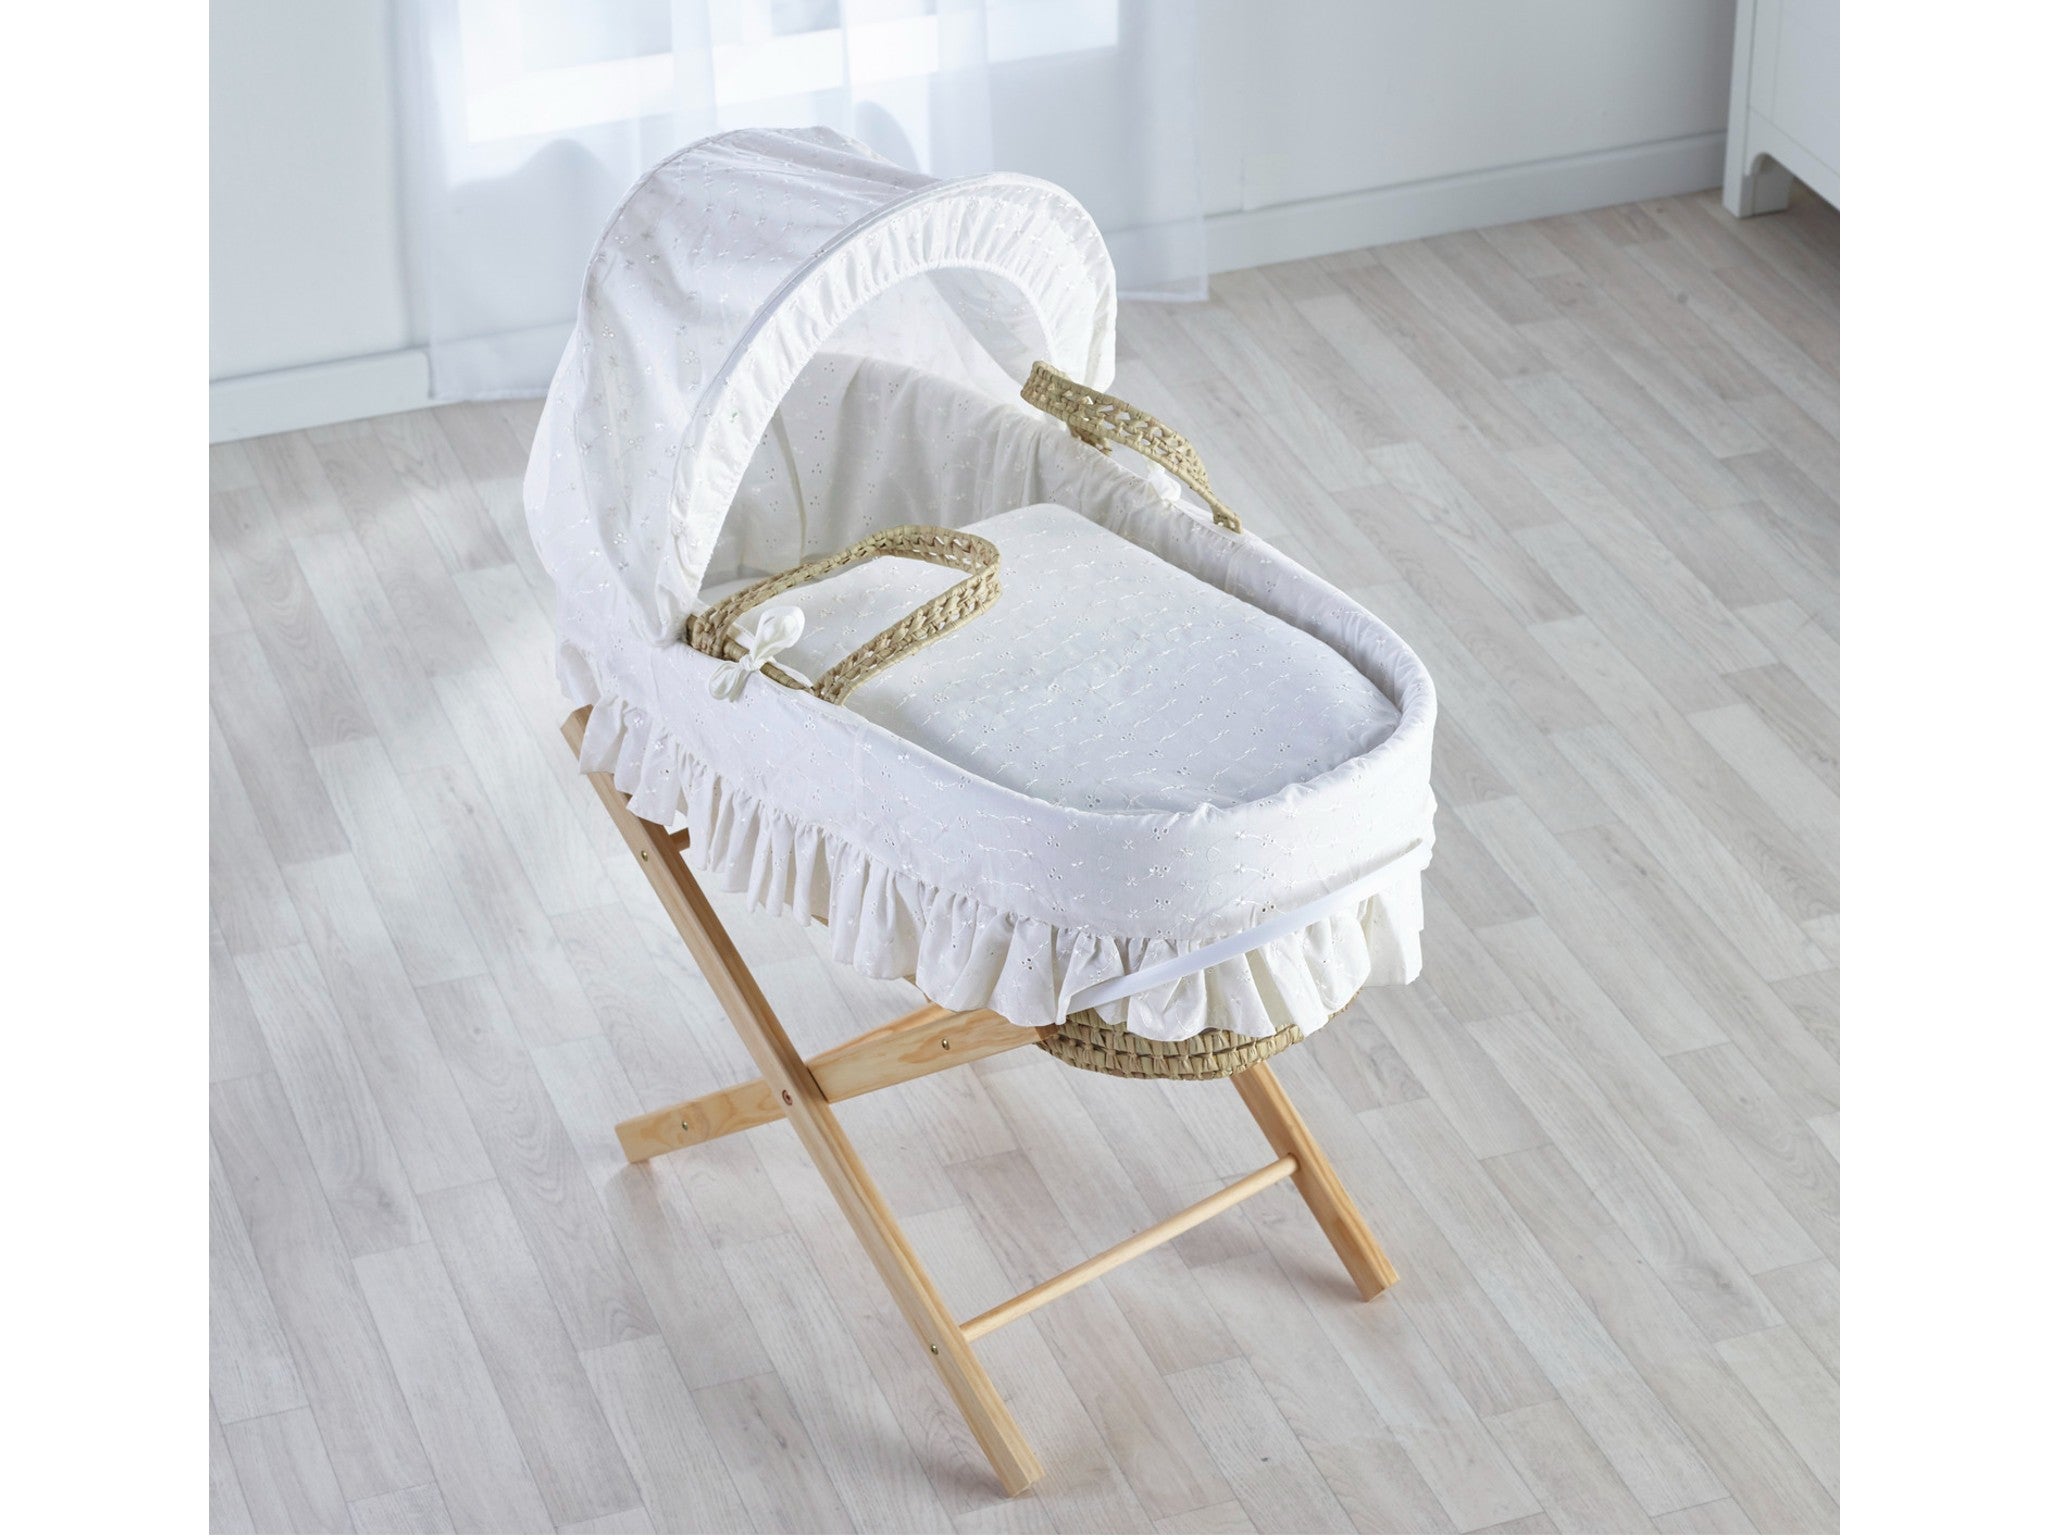 Kinder Valley broderie anglaise white Moses basket with folding stand indybest.jpg